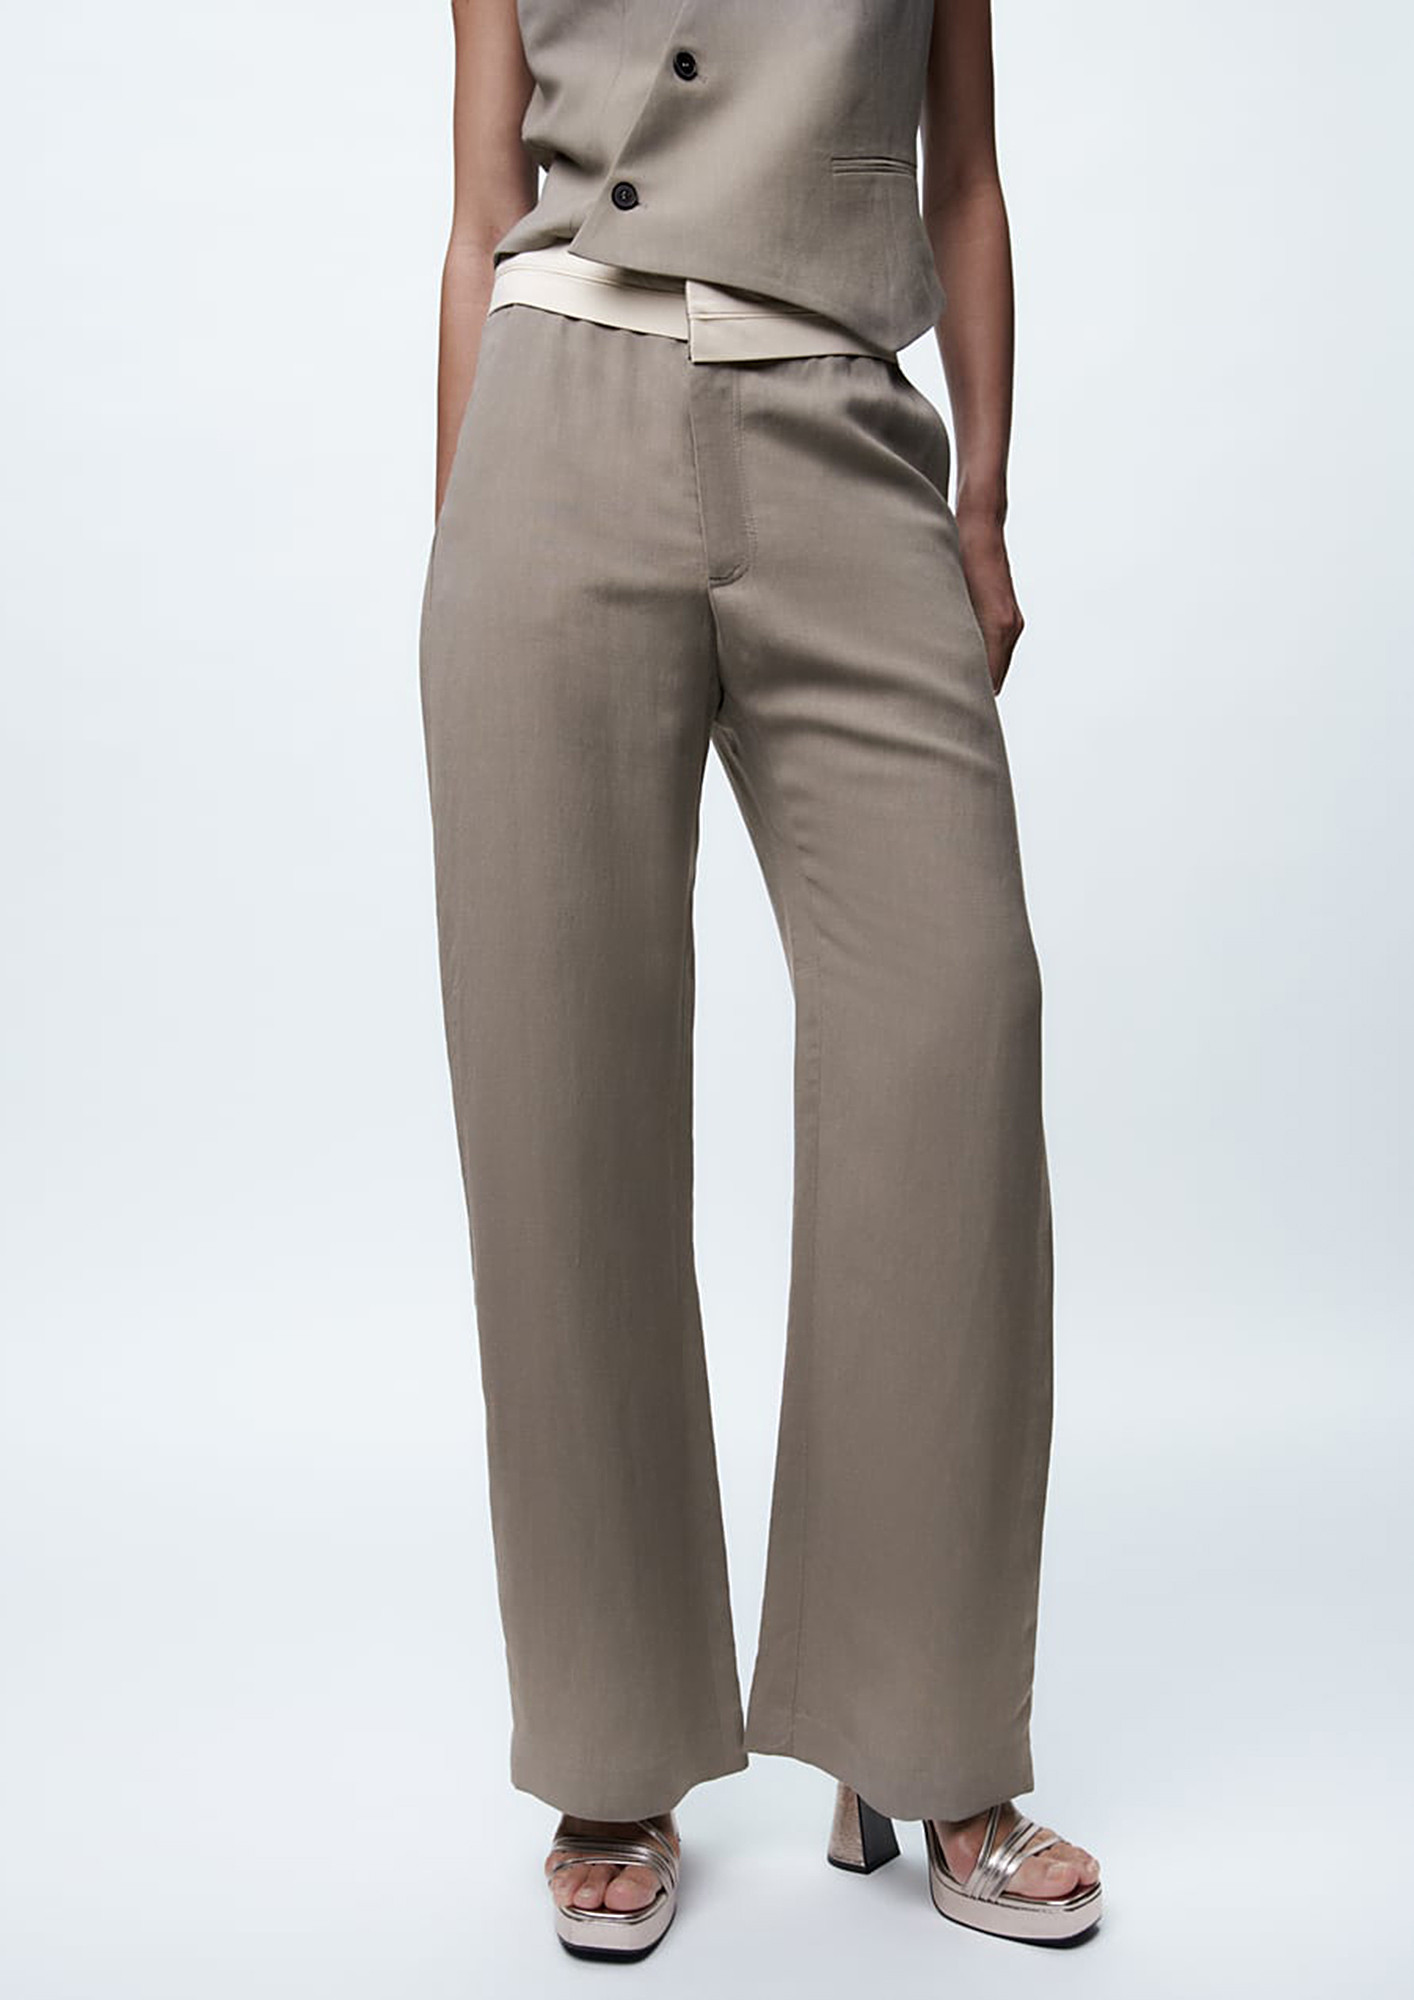 Buy Grey Trousers  Pants for Women by COLOR COCKTAIL Online  Ajiocom